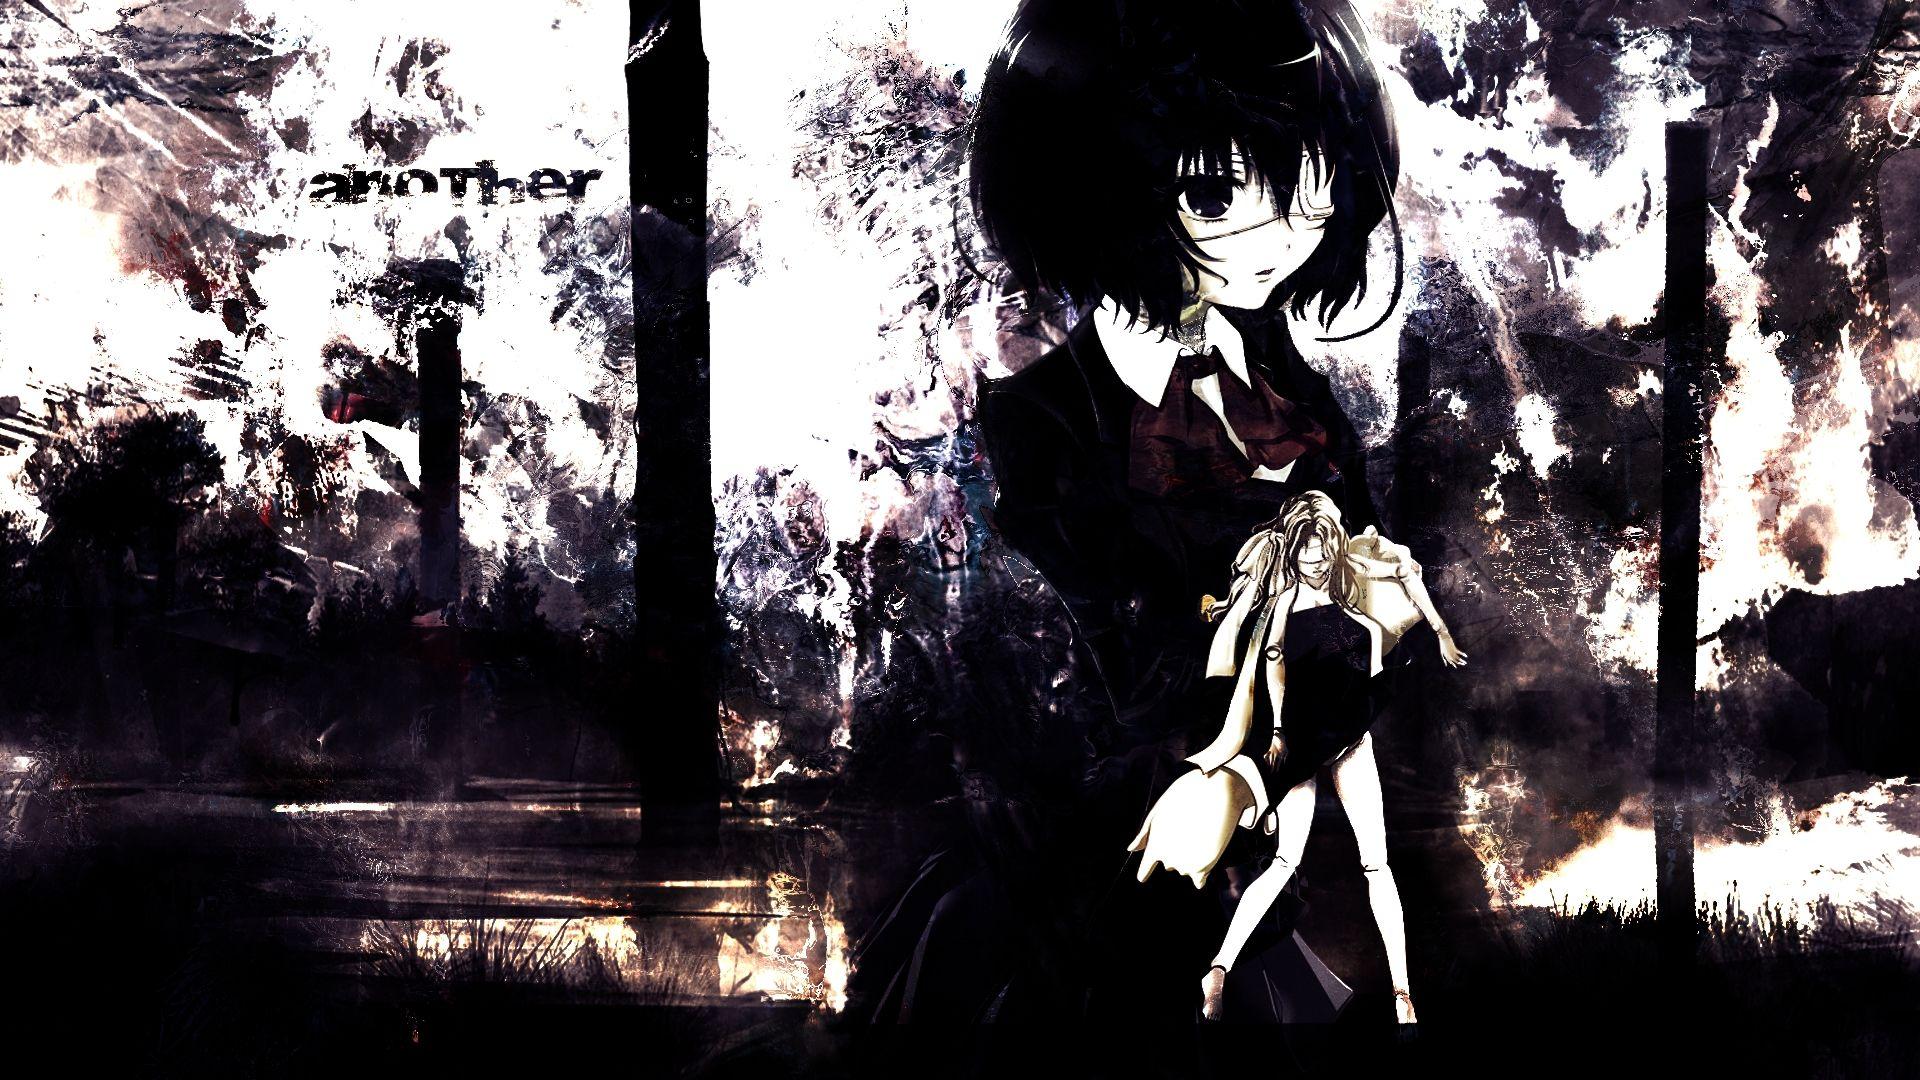 Wallpaper.wiki Free HD Another Anime Wallpaper PIC WPC0012245